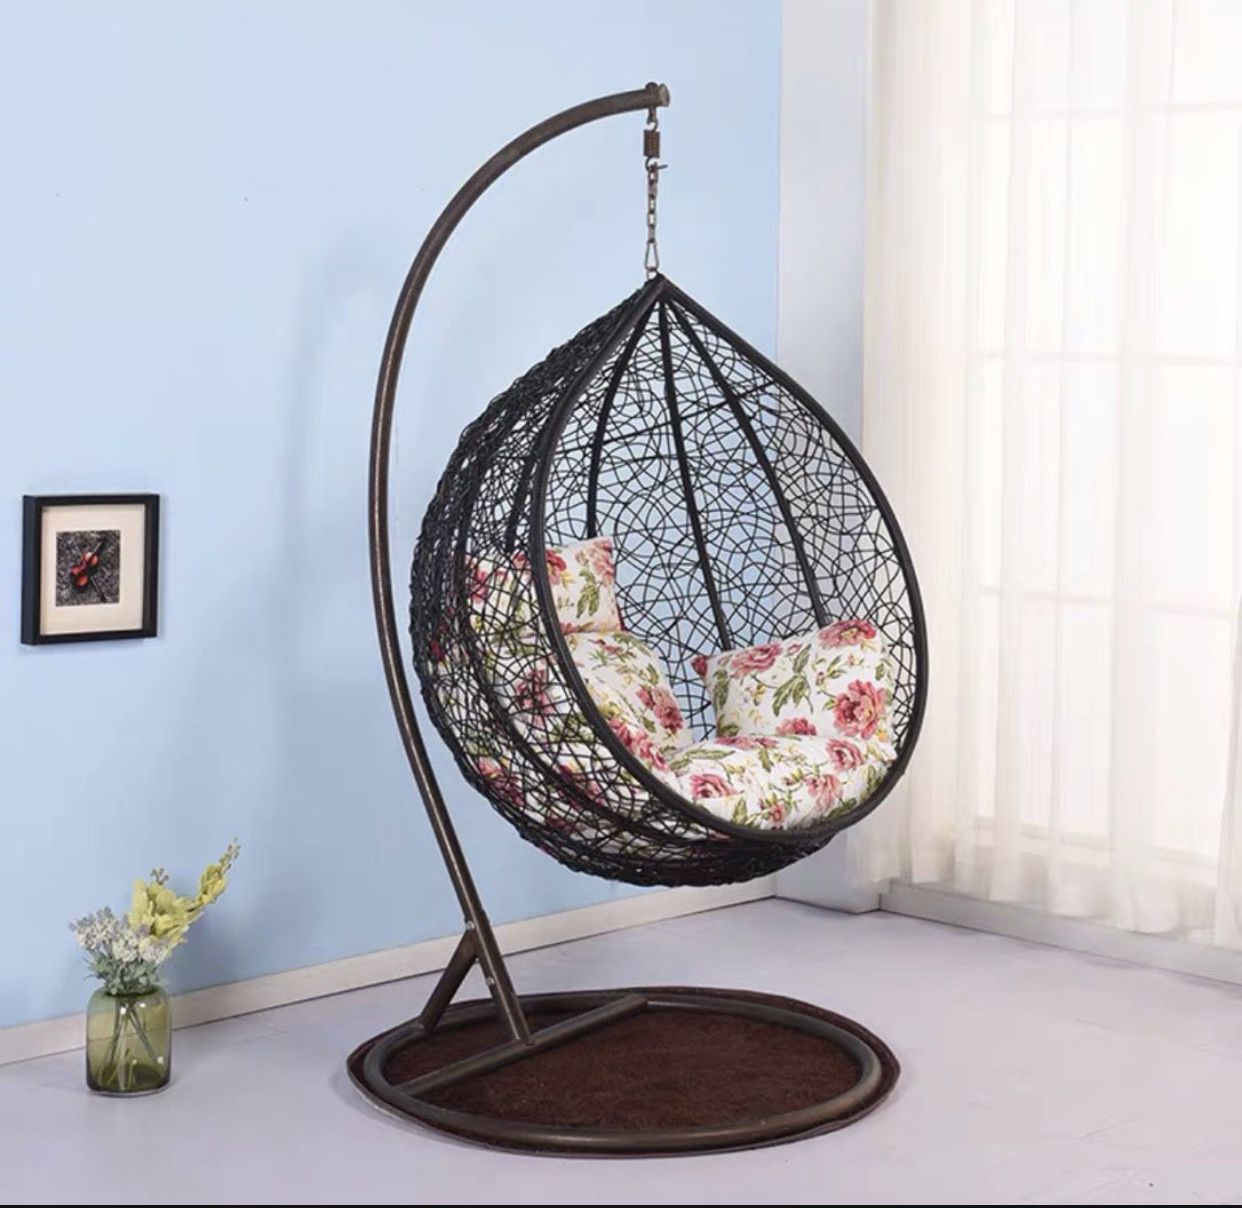 *New* Wicker Style Hanging Egg Chair Patio Porch Lounge Swing w/ Stand Included